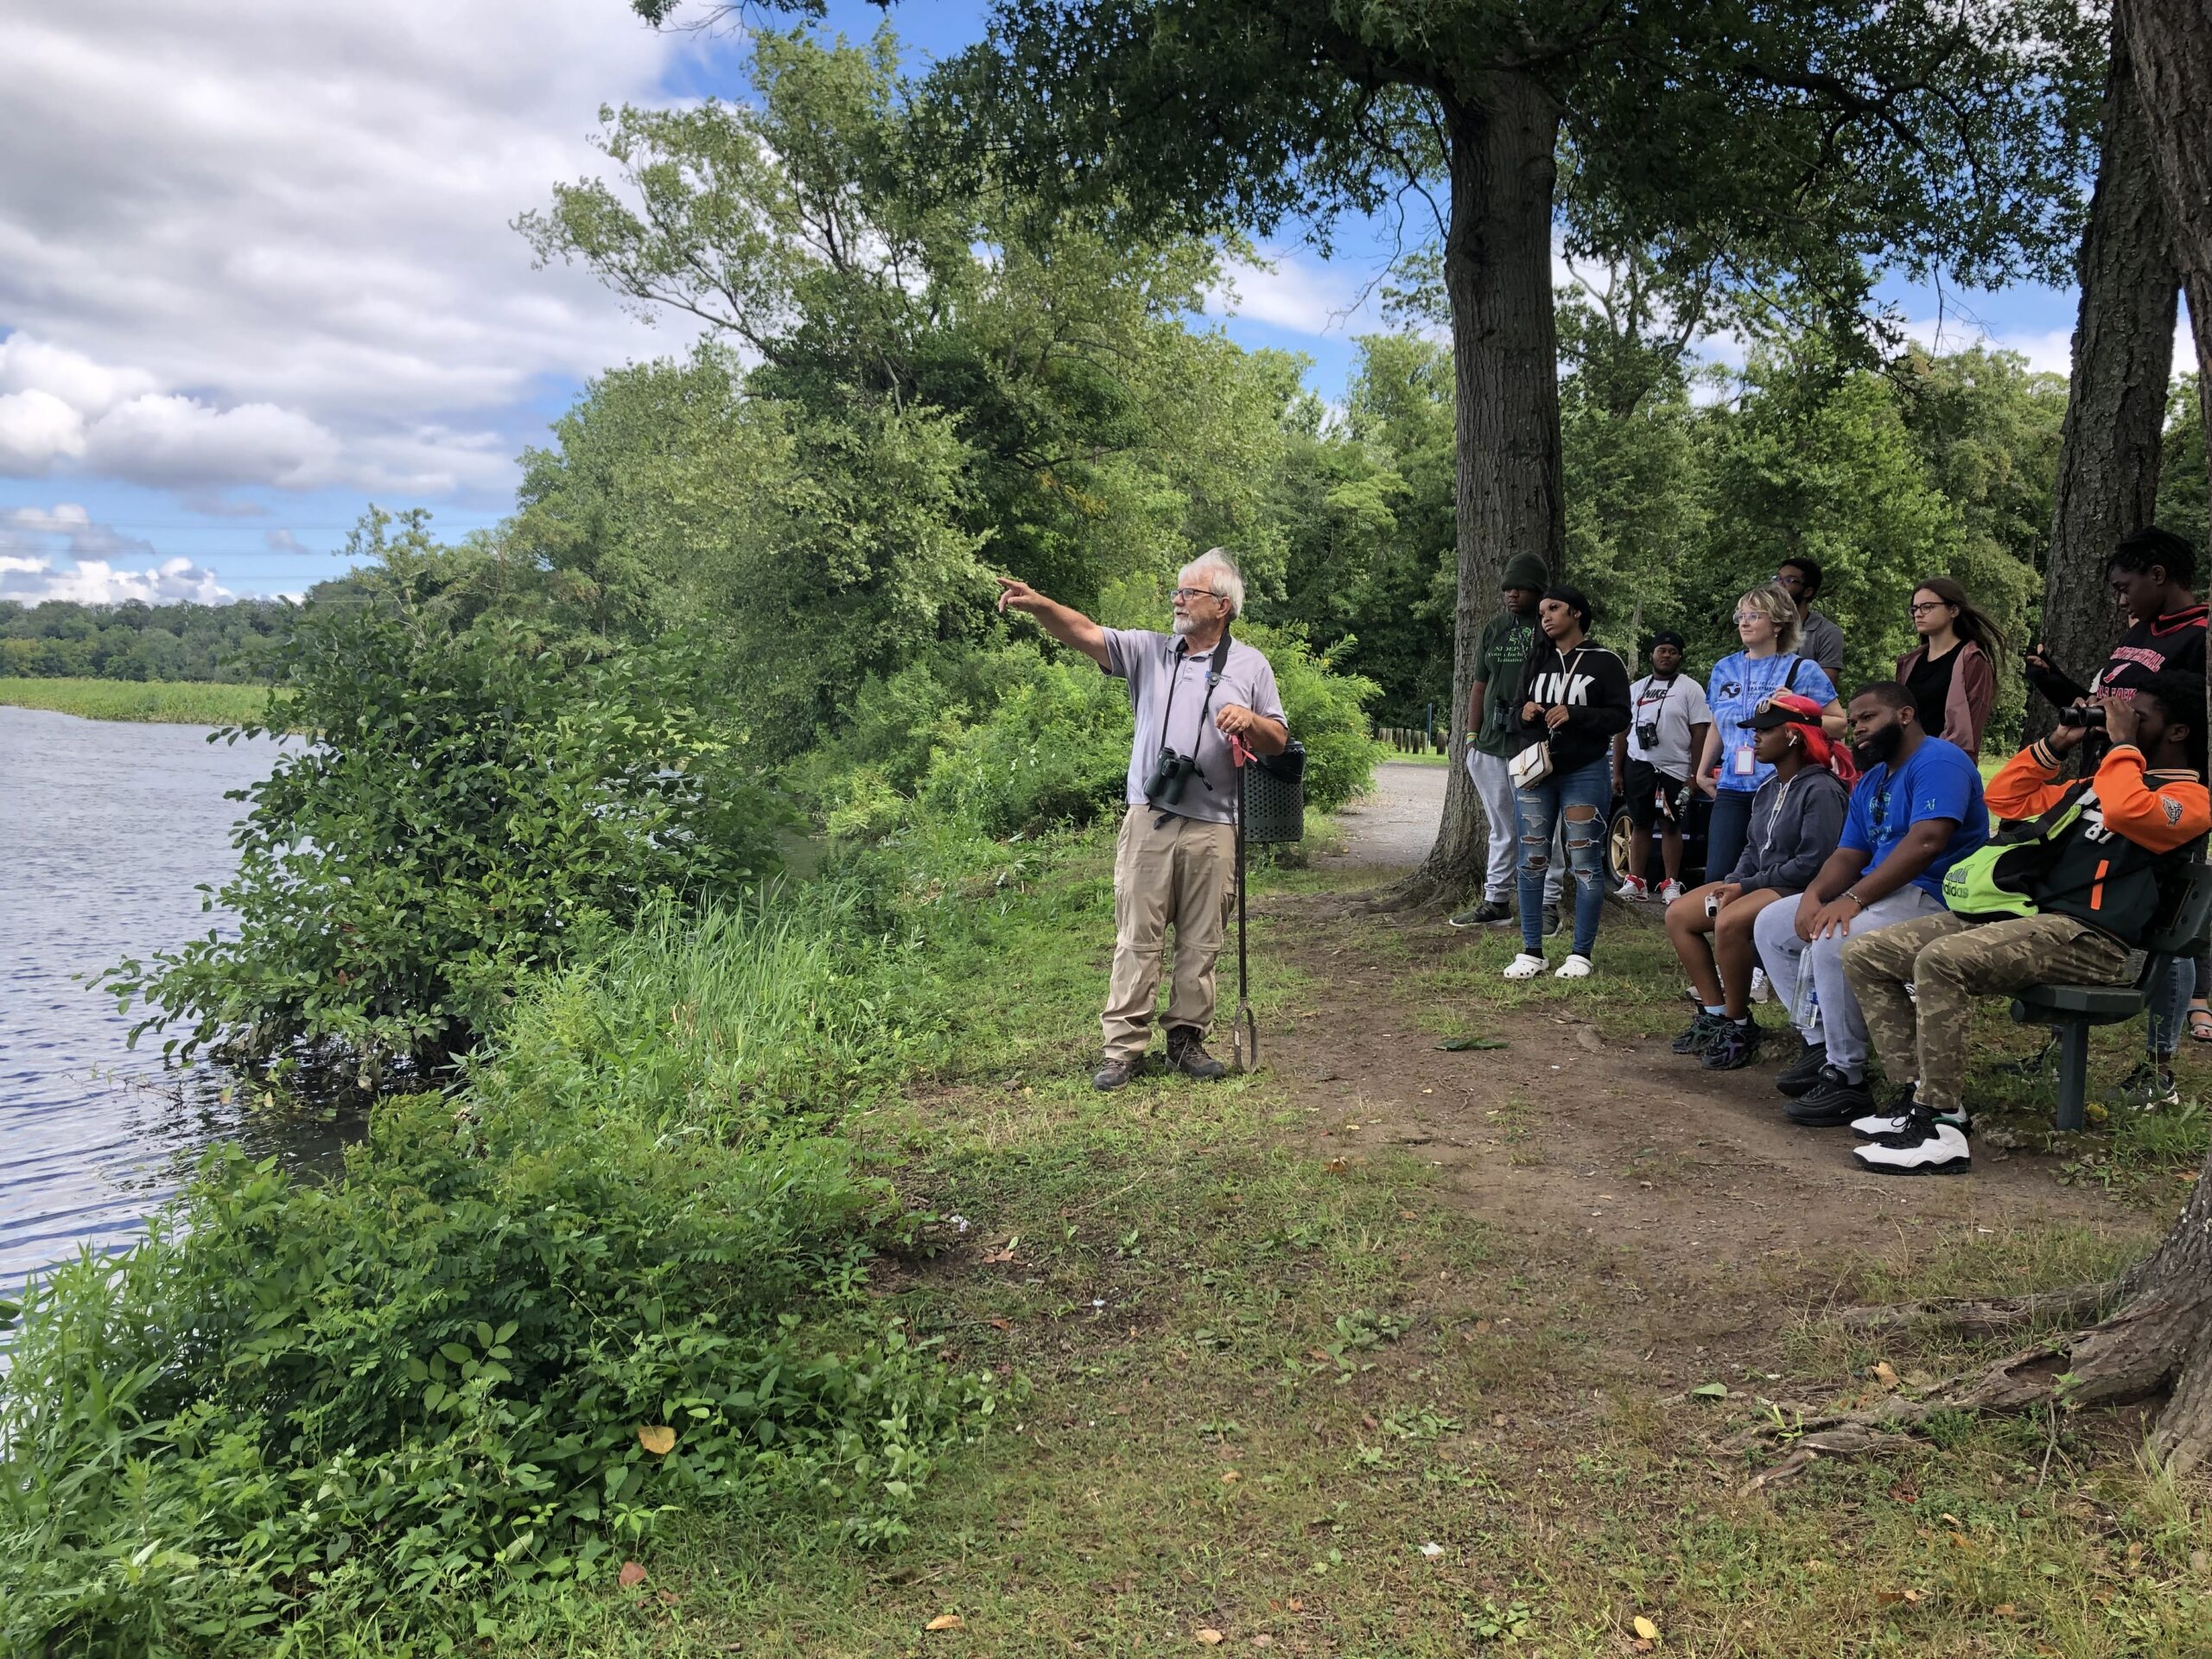 Mark Gallagher of Princeton pointing towards the wetland restoration site at Roebling Park explaining wetland restoration to group of youth